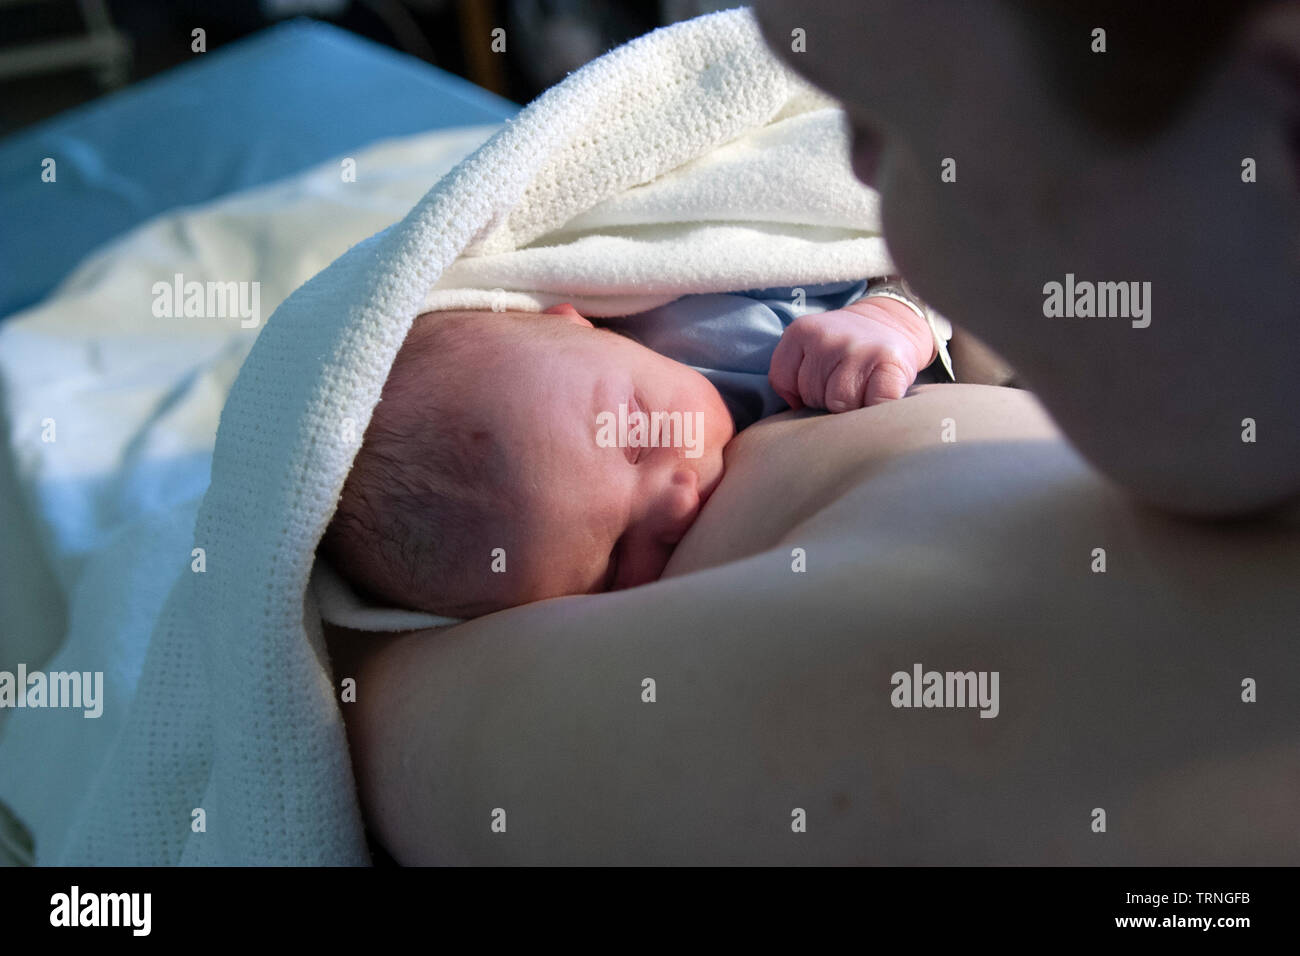 New born baby breastfeeding for the first time Stock Photo